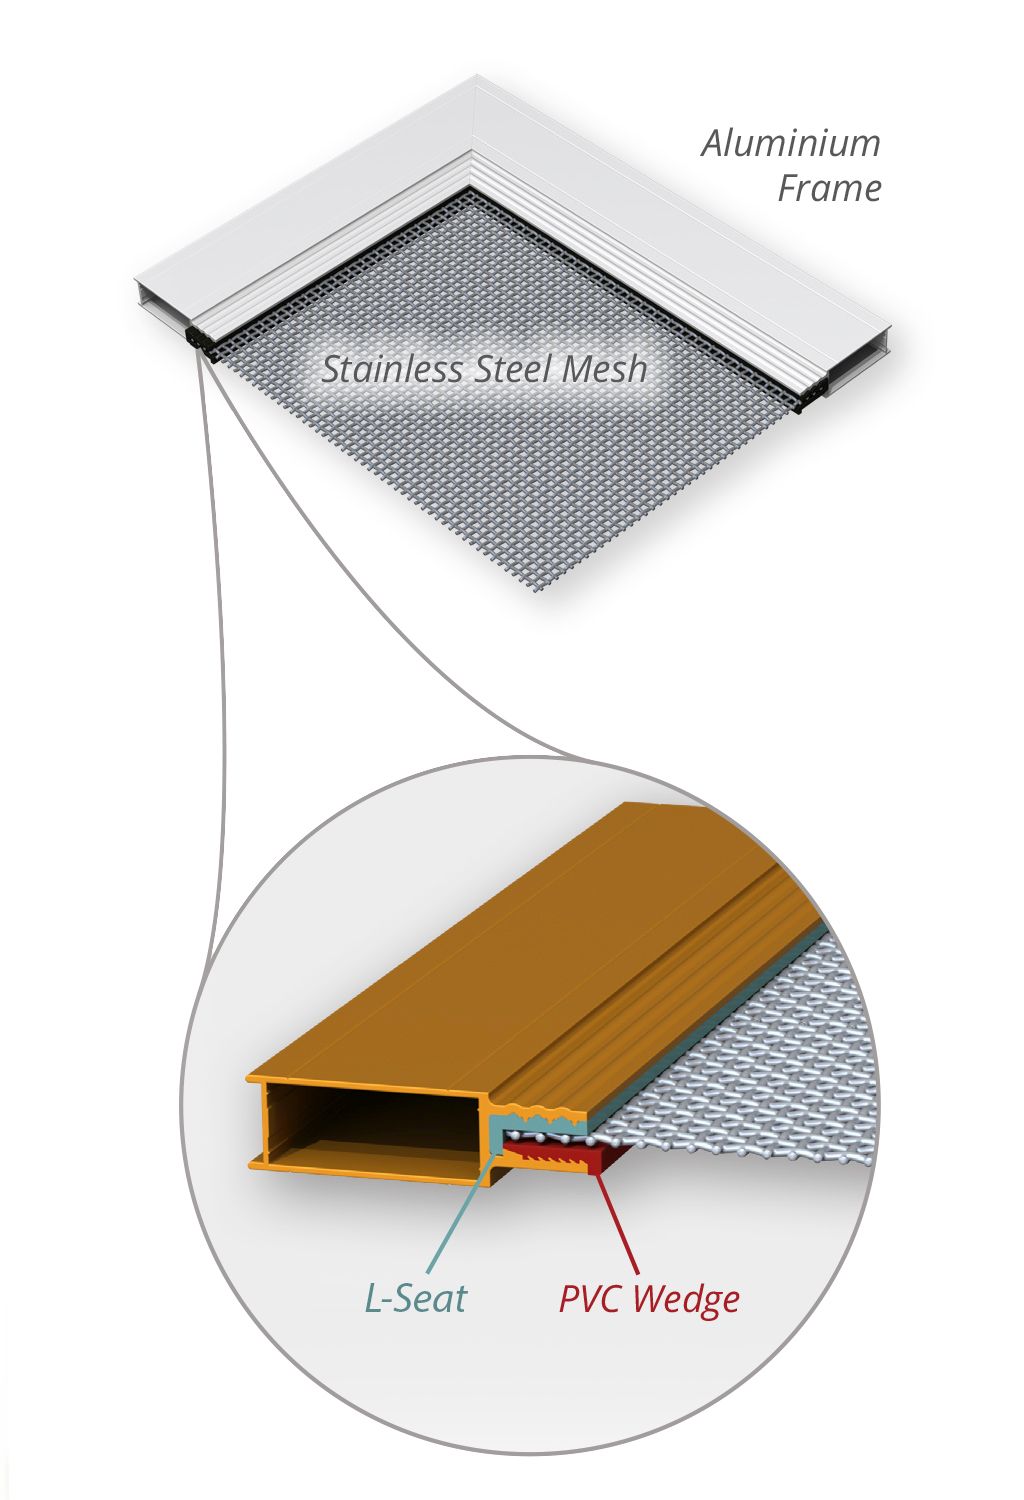 ScreenGuard’s patented 3 point internal rib design provides additional resistance against mesh removal by an intruder